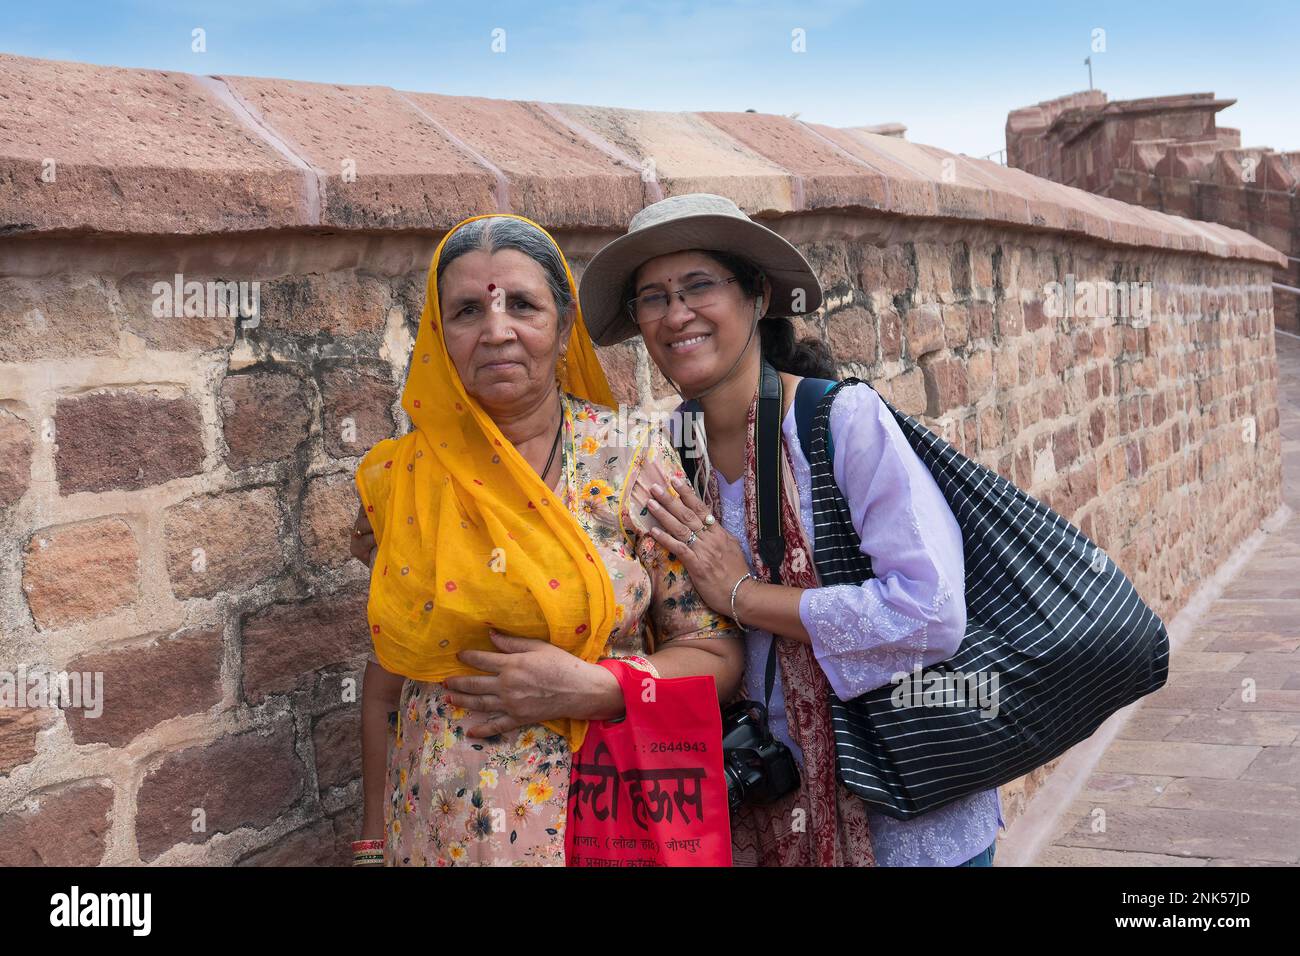 Jodhpur, Rajasthan, India - 17th October, 2019 : Happy Indian modern female solo traveller posing with traditional dressed old Rajasthani woman. Stock Photo